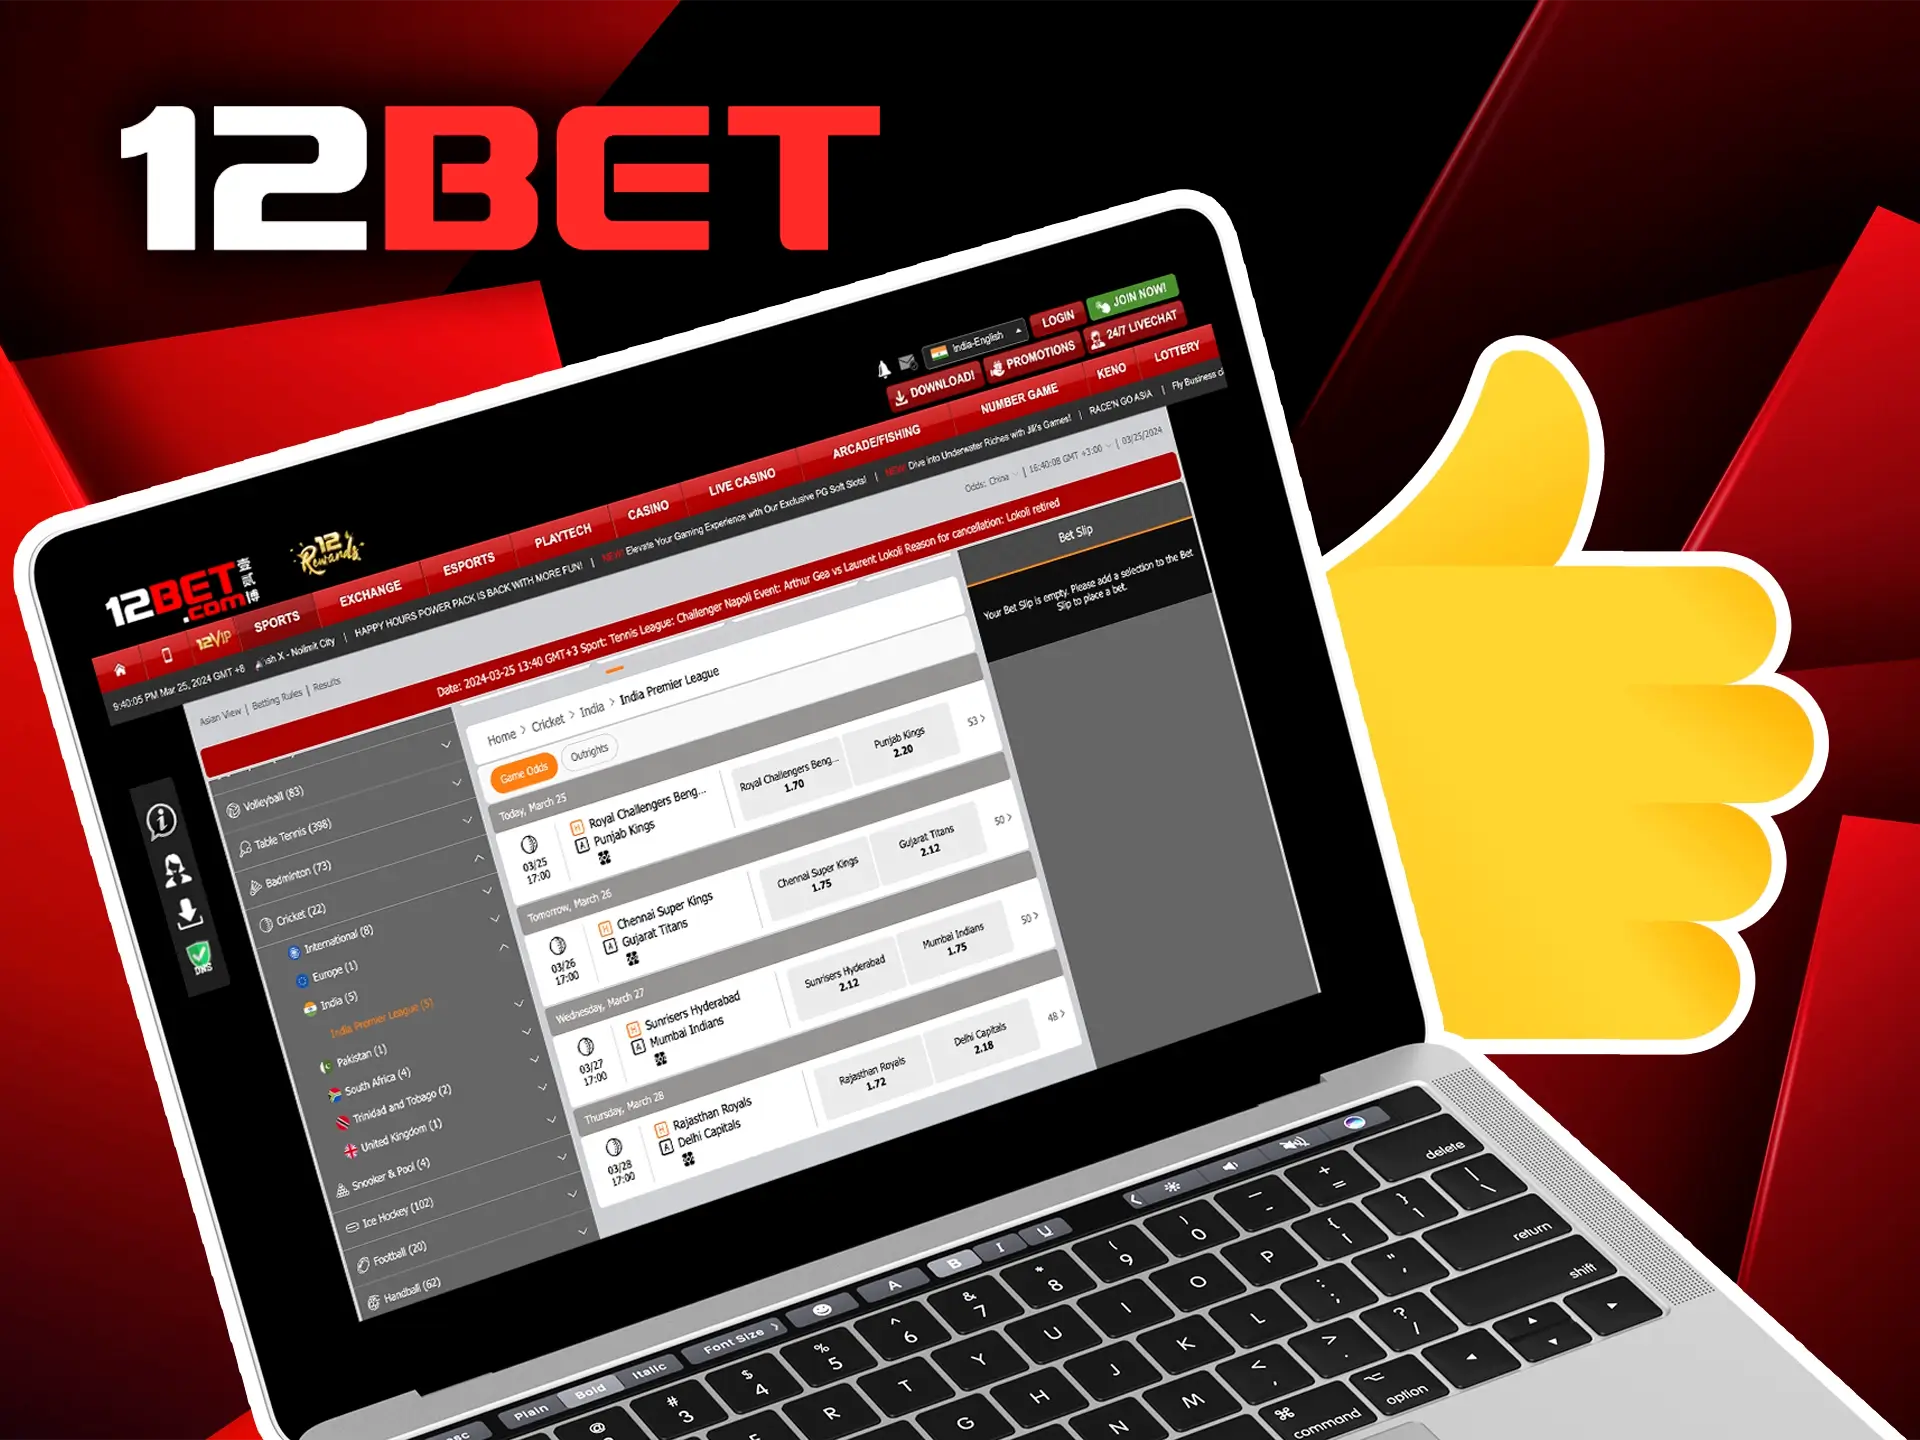 12Bet has earned its trust from users due to its excellent service and high protection of its customers' data.